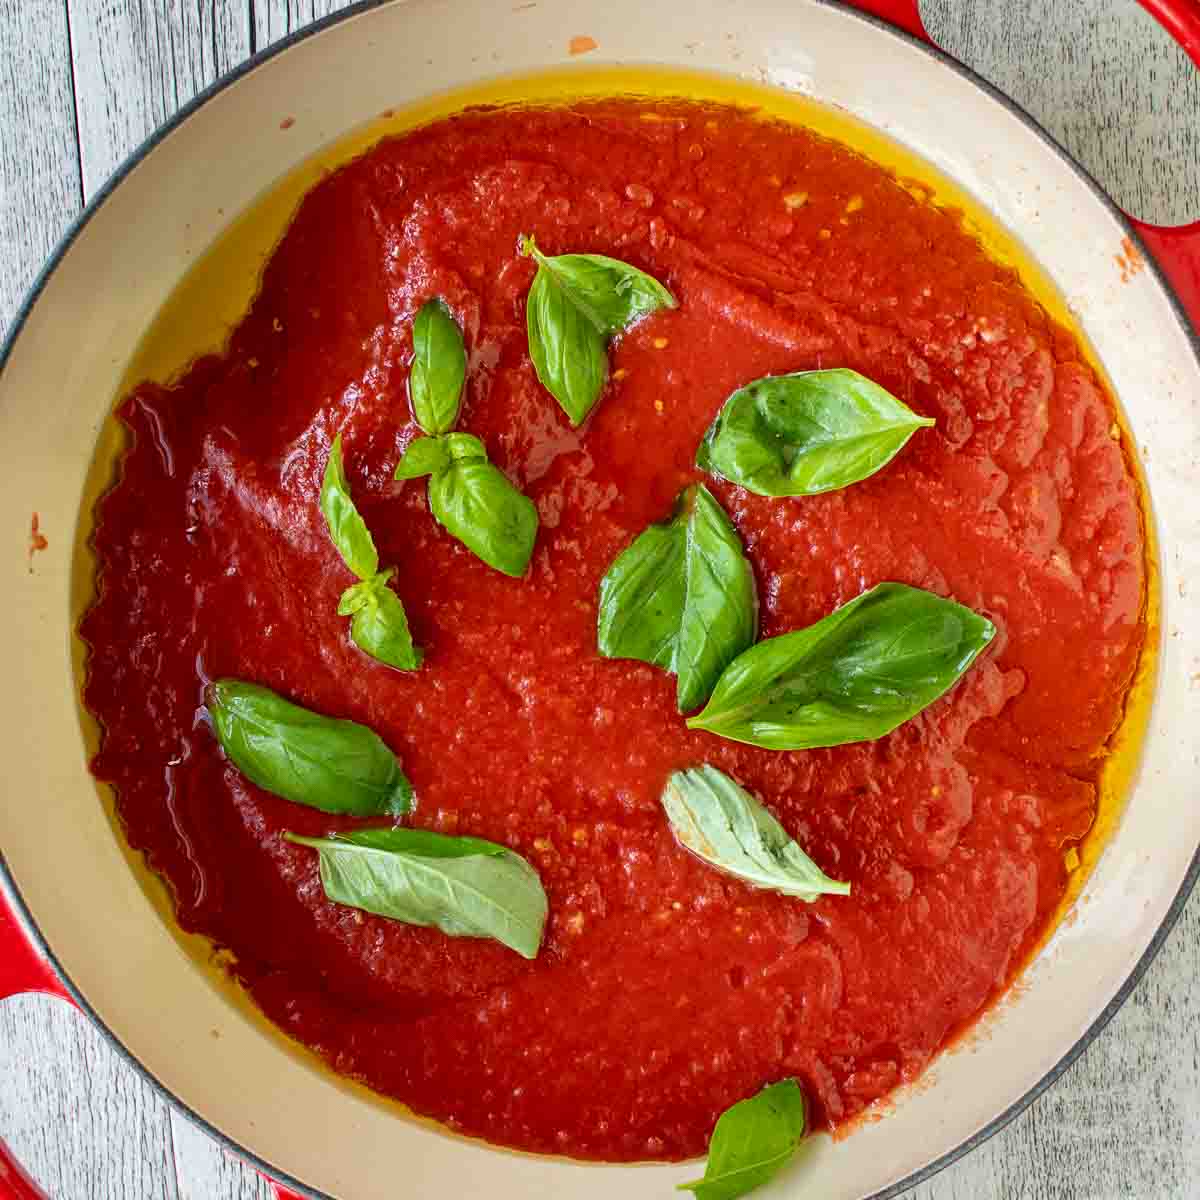 Overhead view of fresh basil leaves on top of tomato sauce in a pan.